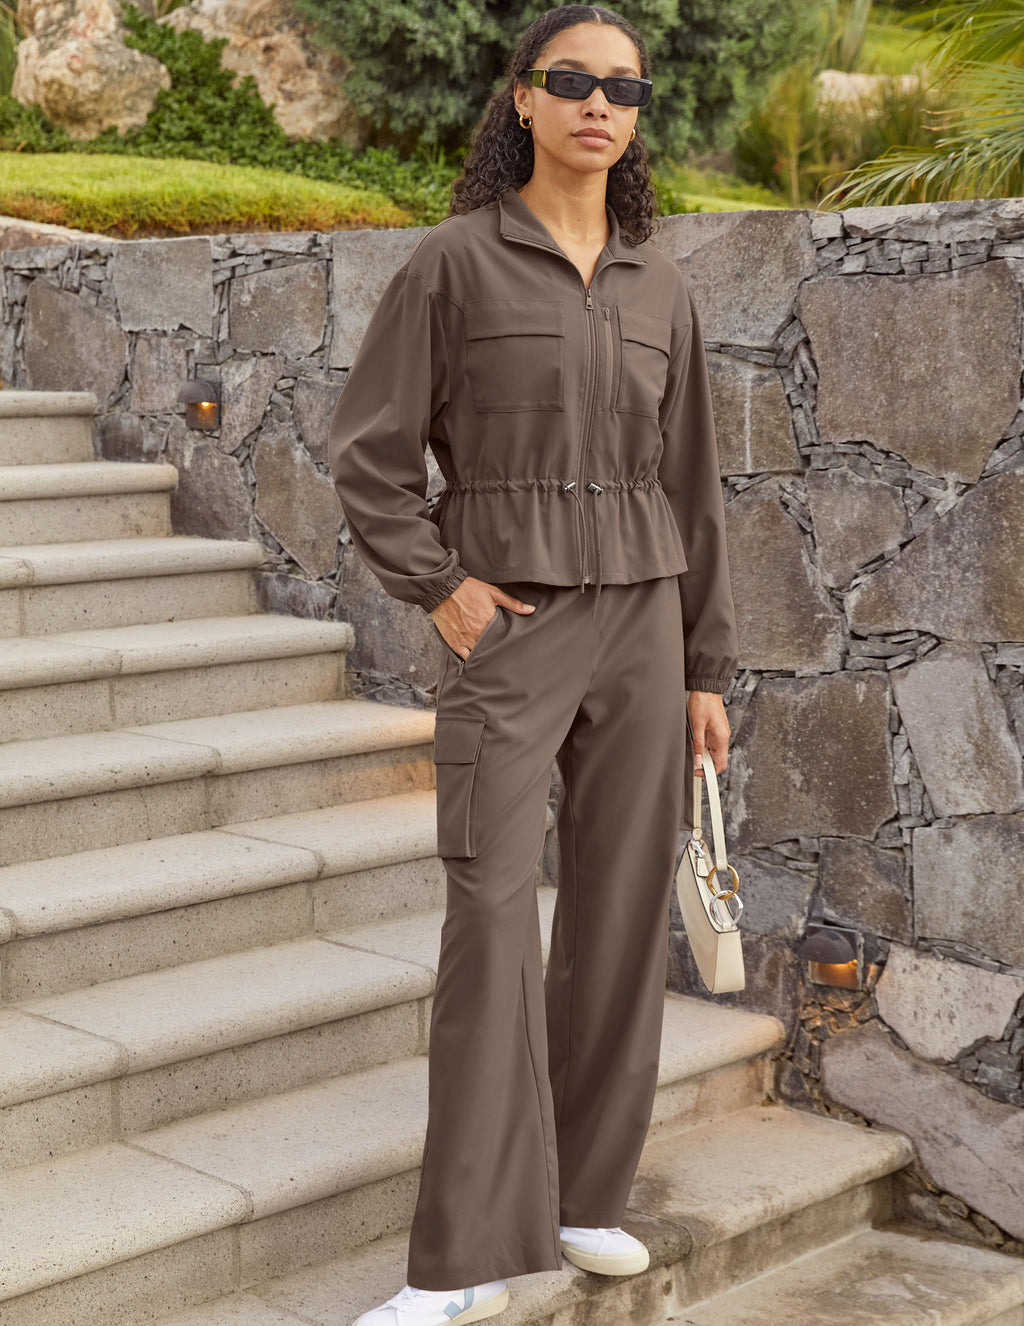 City Chic Cargo Pant Featured Image